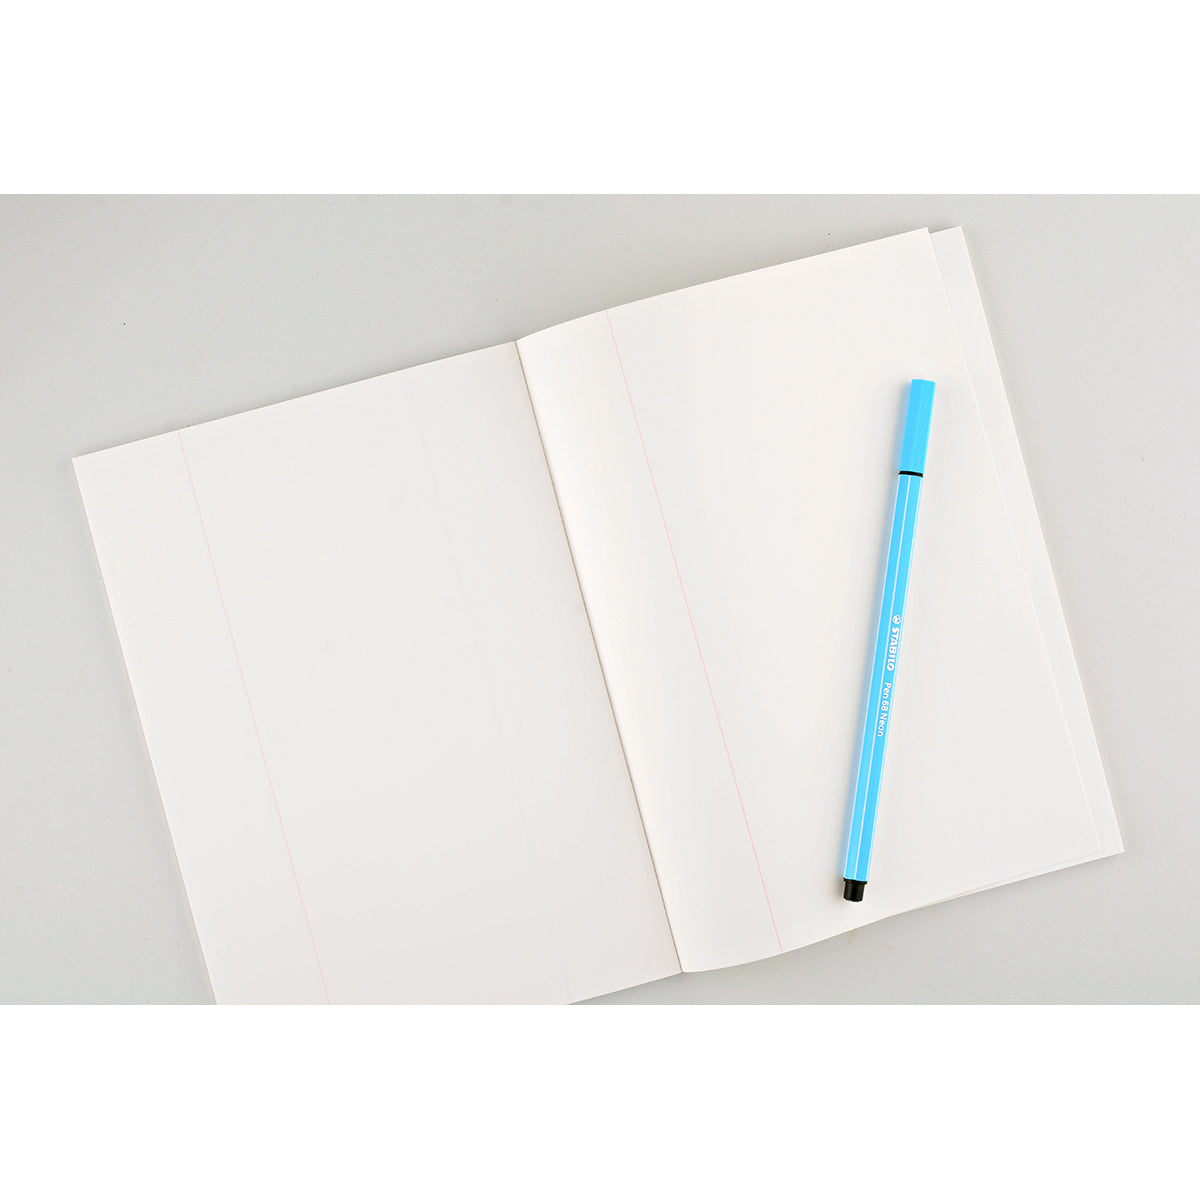 LIFE Stationery Margin A5 or B5 Notebook | Plain, Section or Ruled 